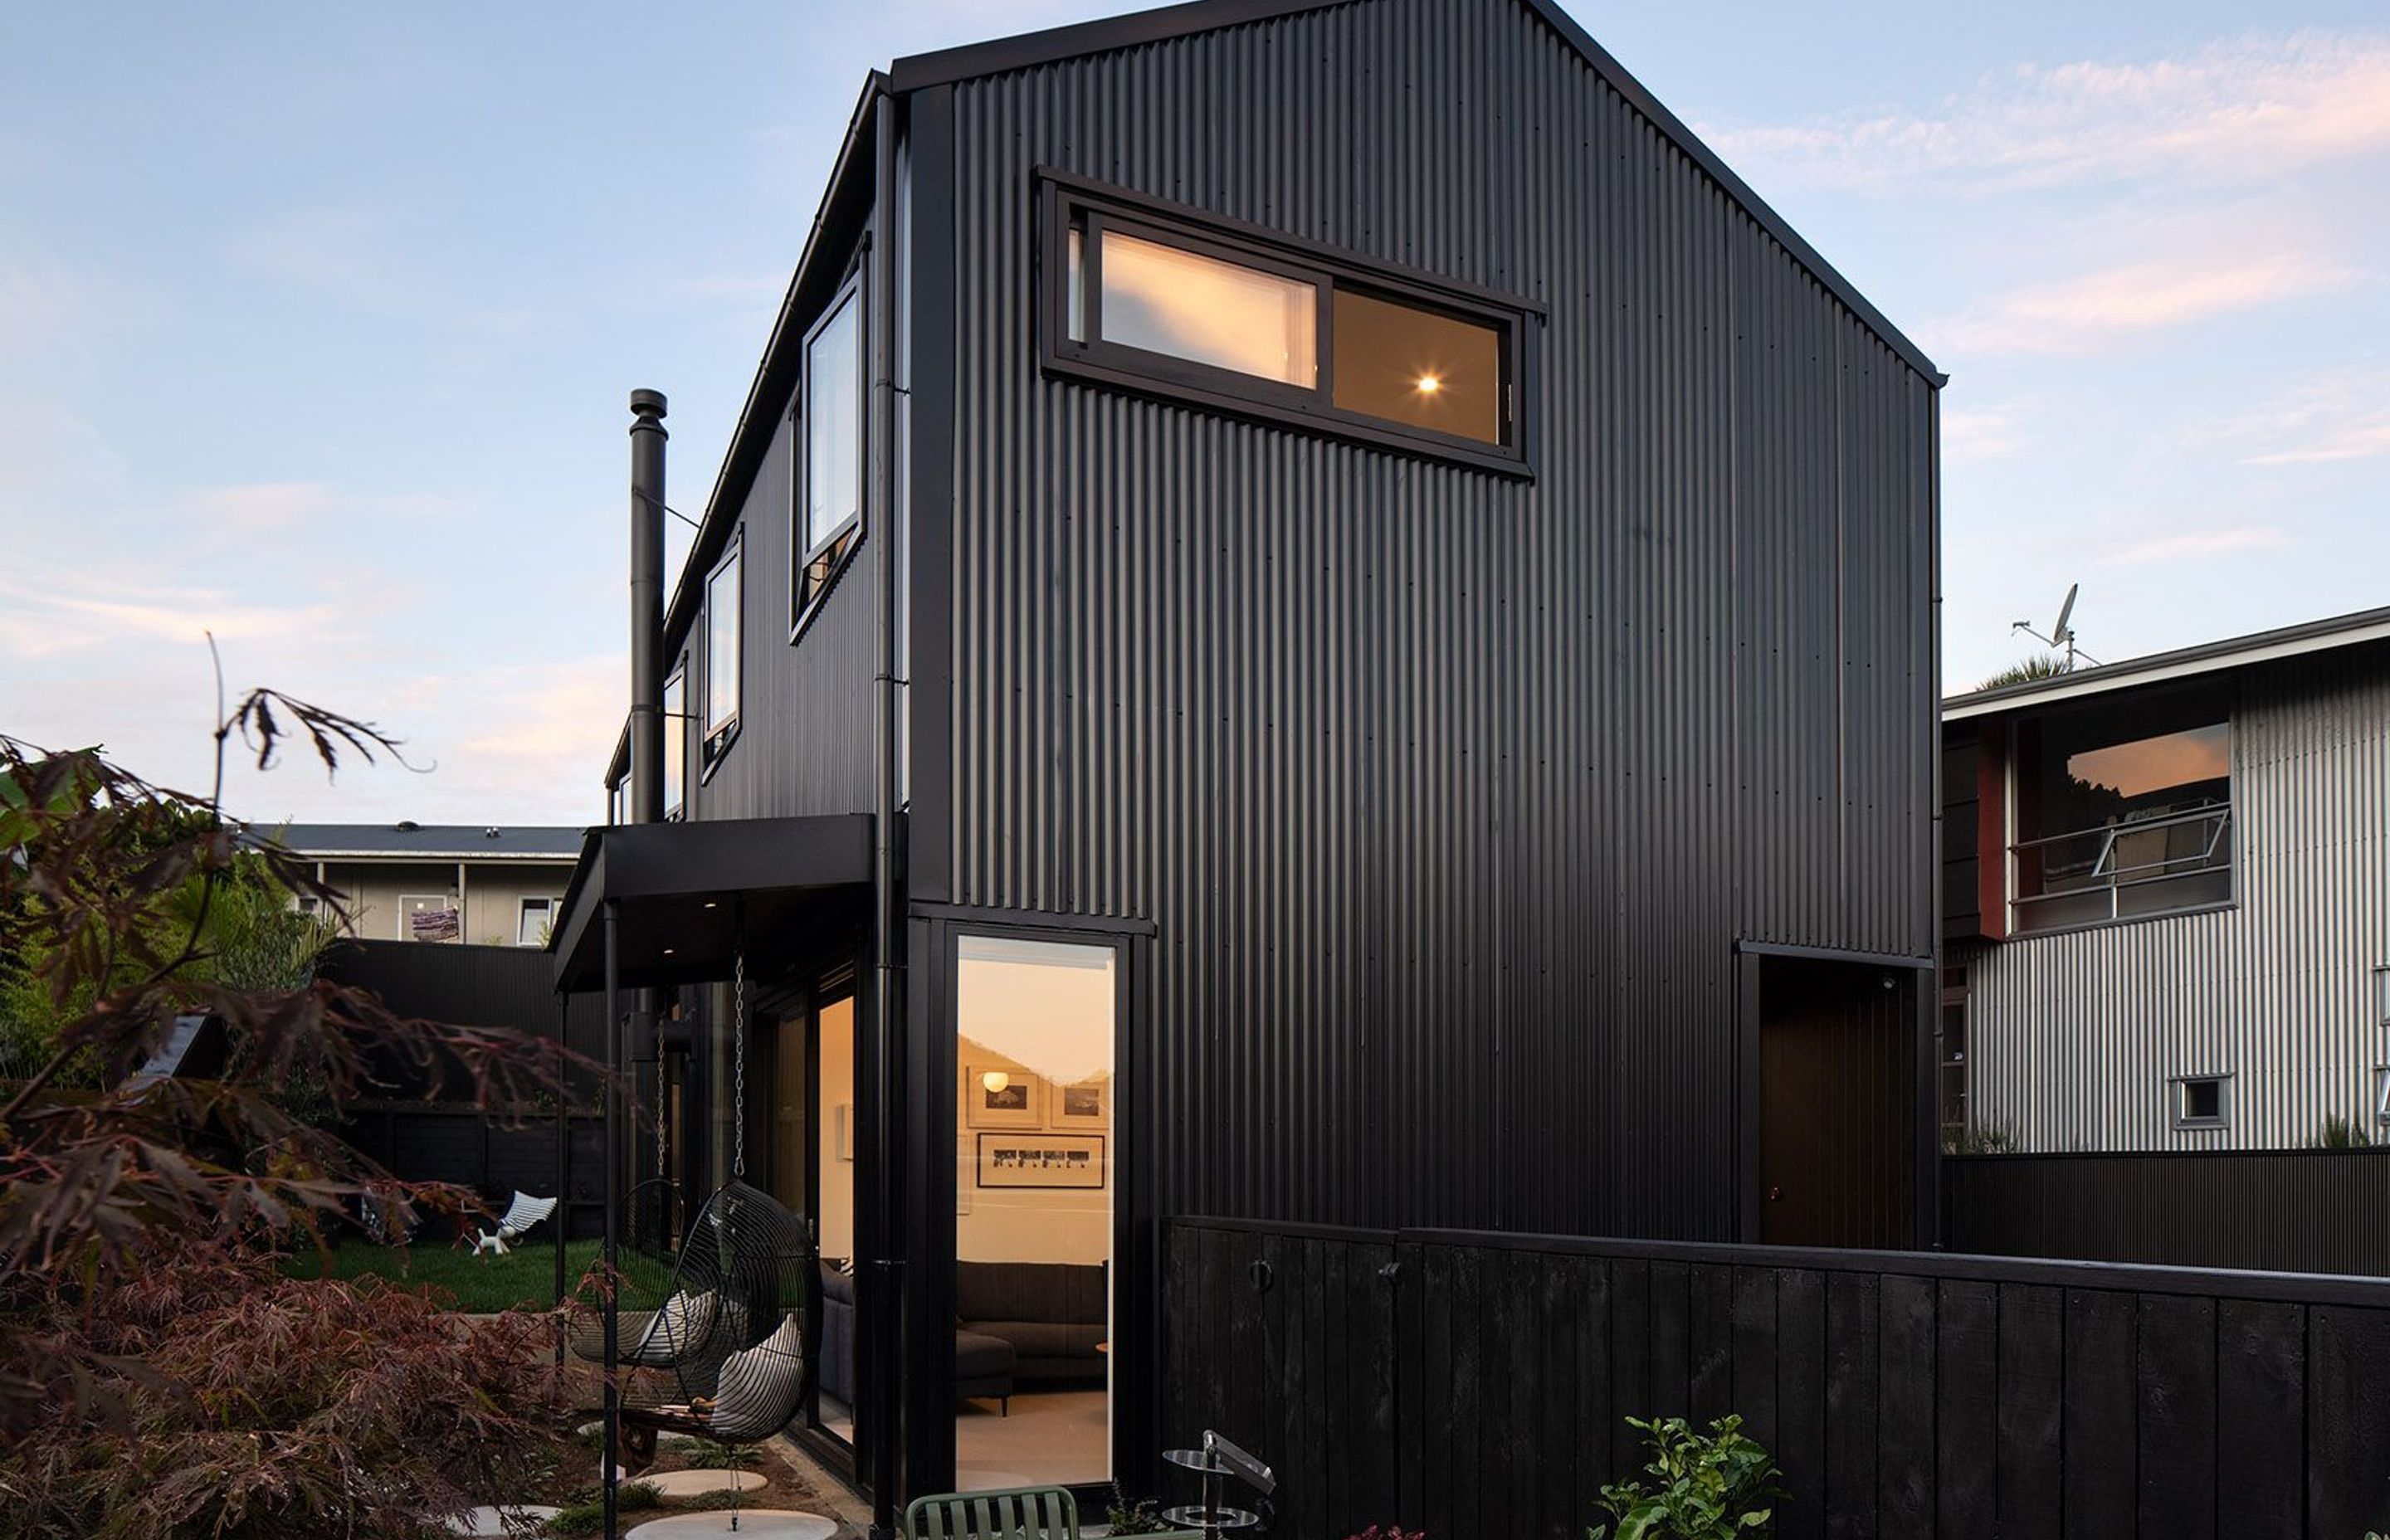 Clad in black corrugate, the front elevation casts a striking gabled form within its tight Grey Lynn site.